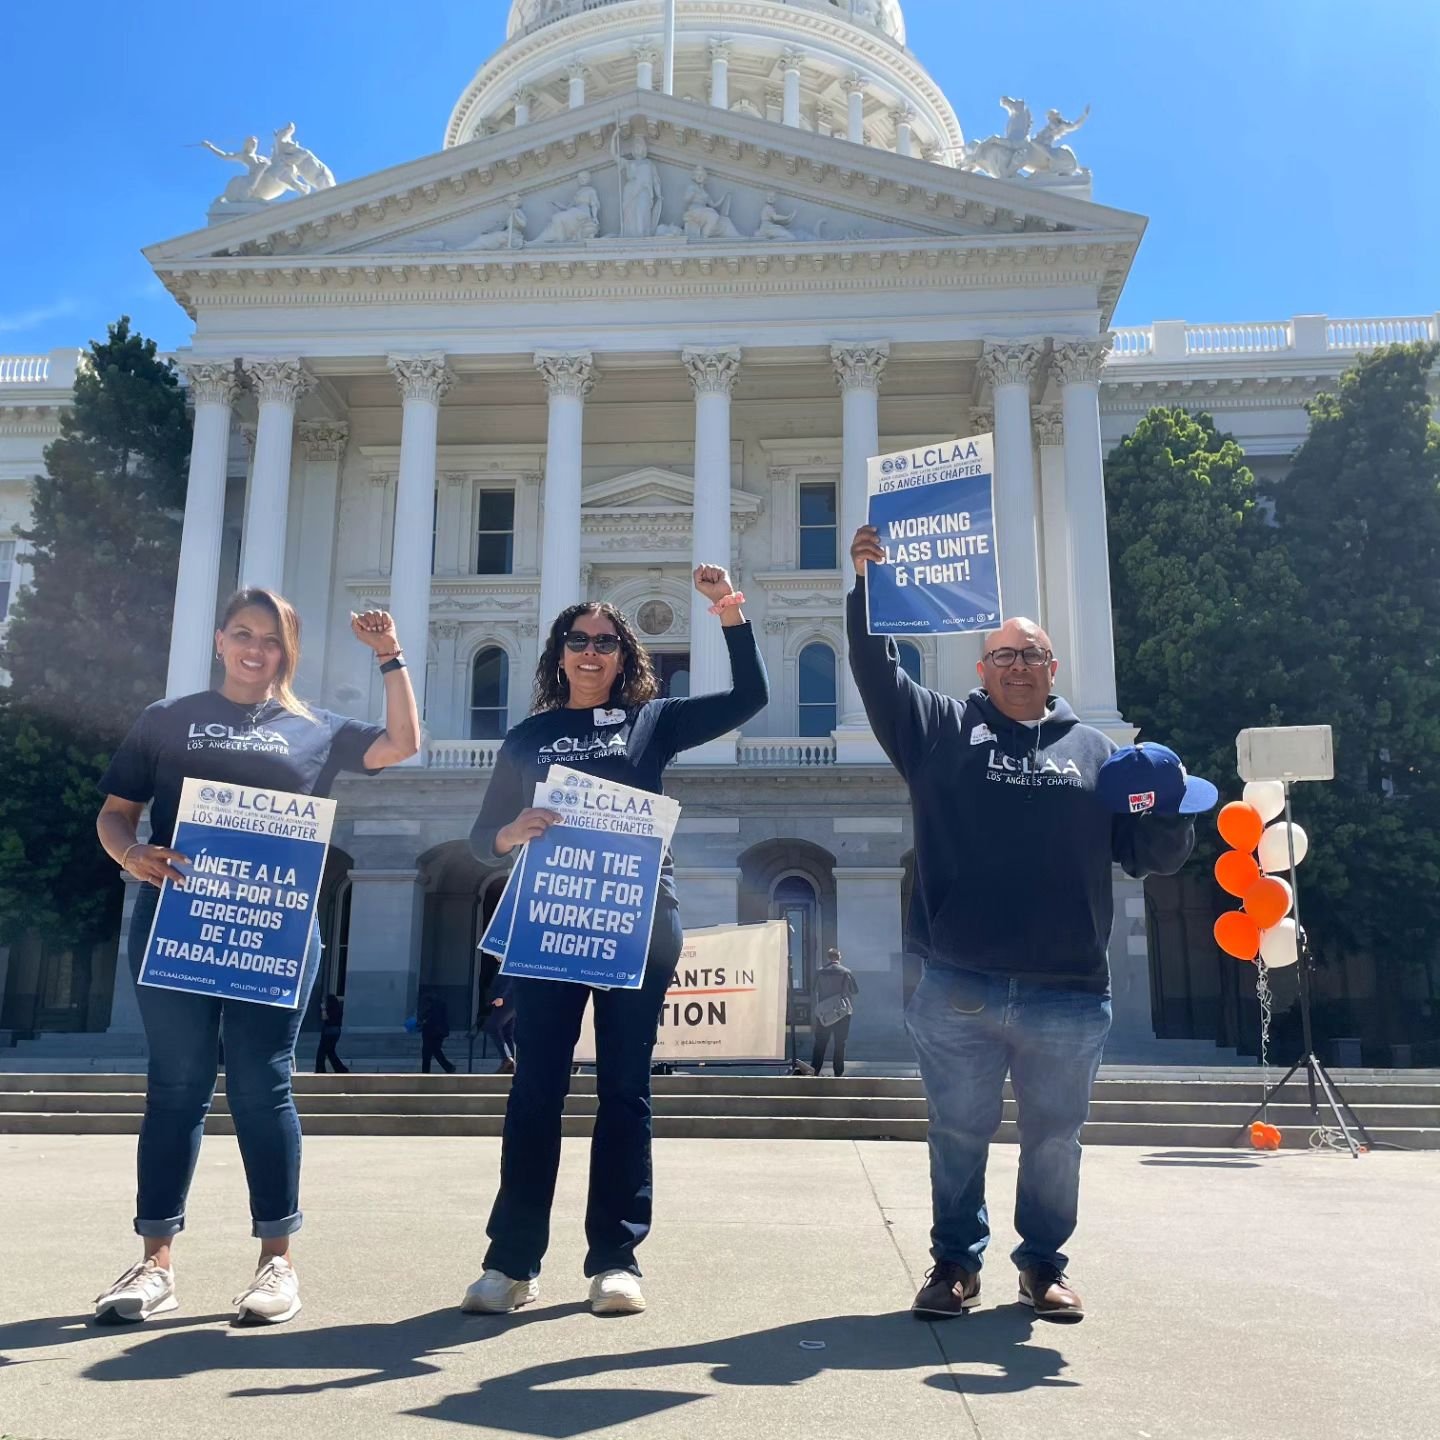 Last Tuesday @lclaalosangeles Chapter visited Capital Building in Sancramento, California, to advocate for access to health care for immigrants and Immigration issues. By advocating on these matters, we are giving a voice to our hermanos and hermanas